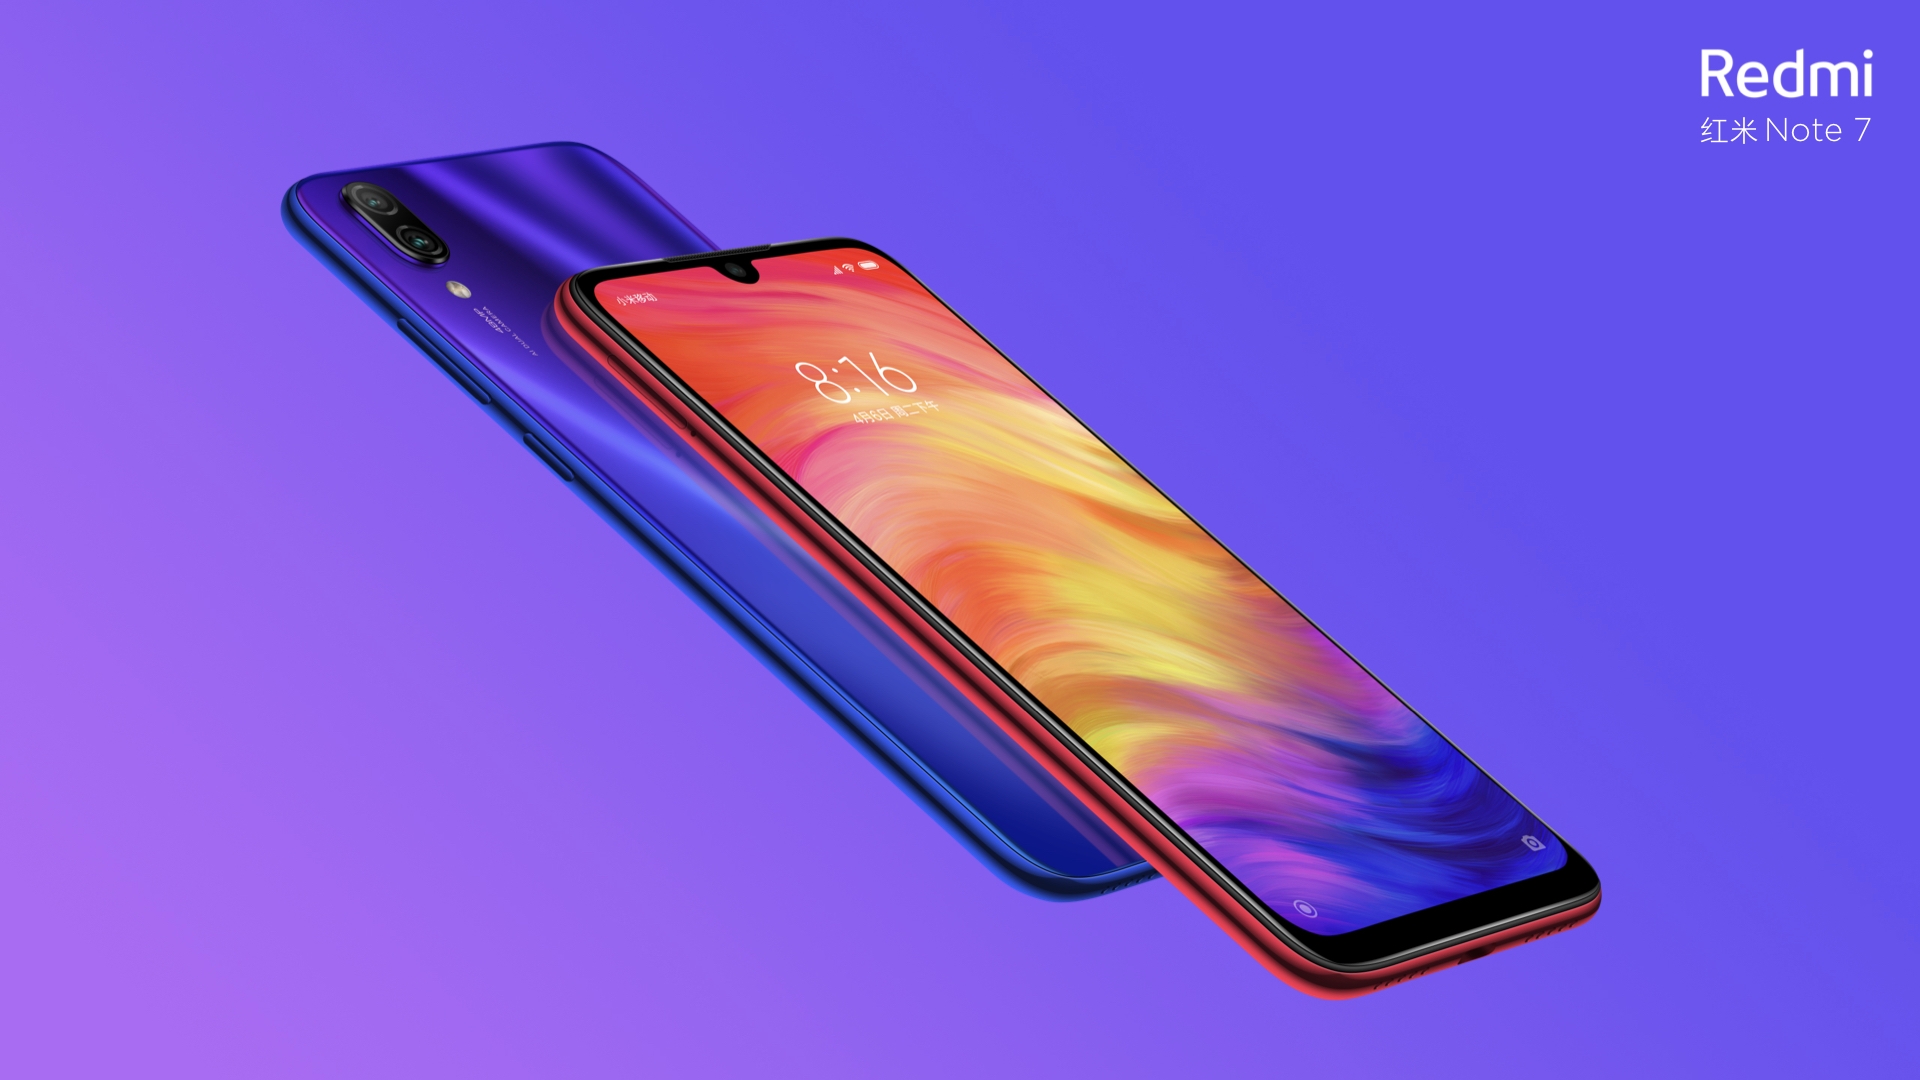 Redmi Note 7 launched: A 48MP main camera for $150? (Updated)